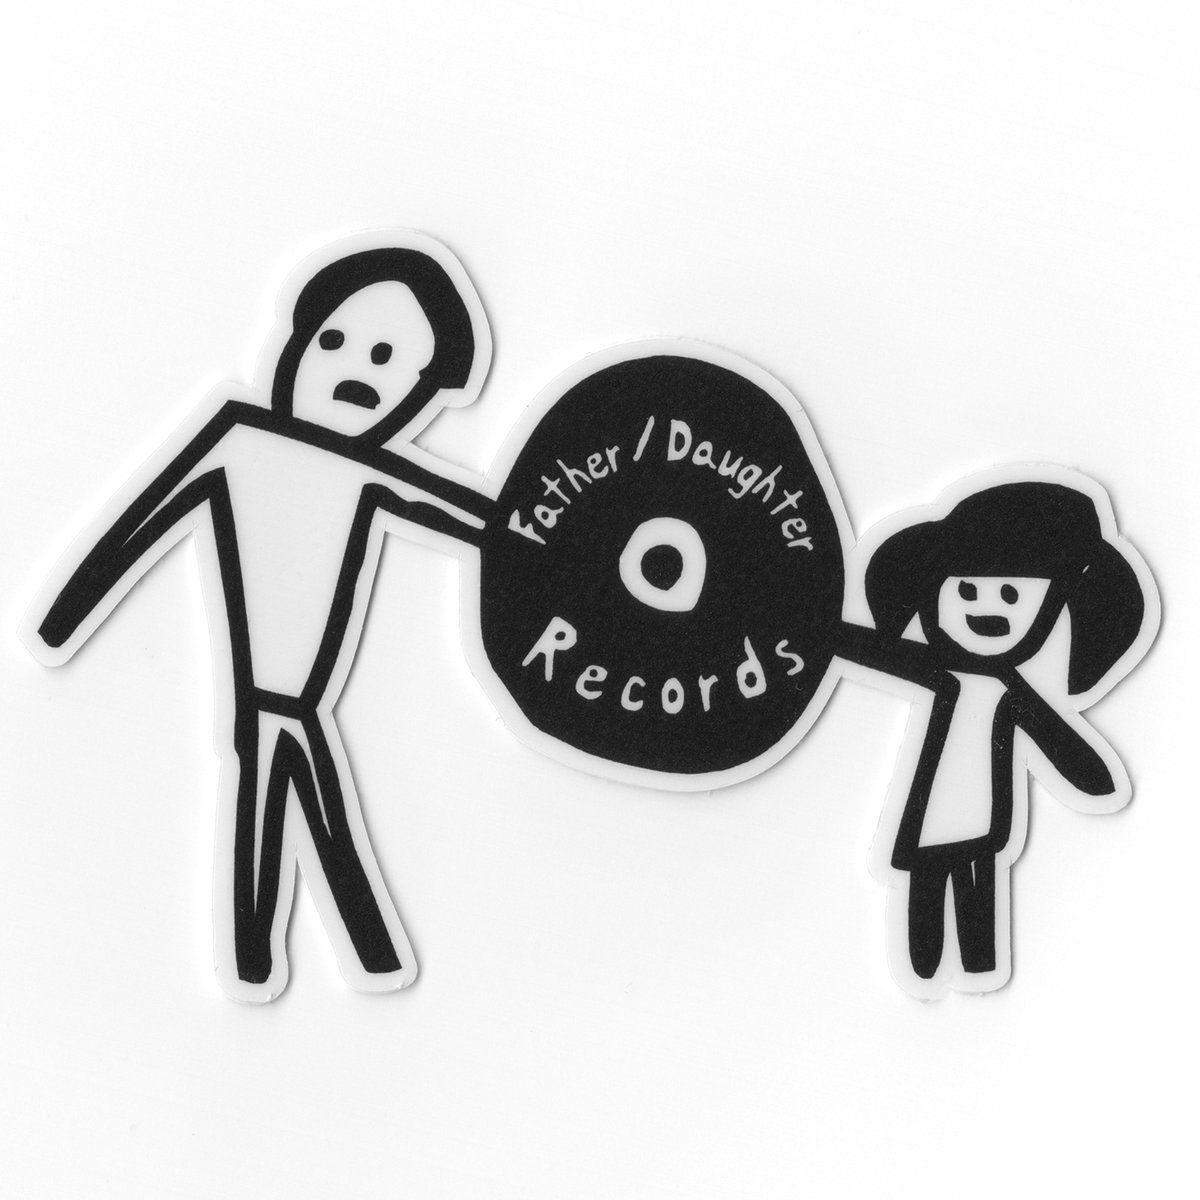 Daughter Logo - Father Daughter Logo Die Cut Sticker. Father Daughter Records